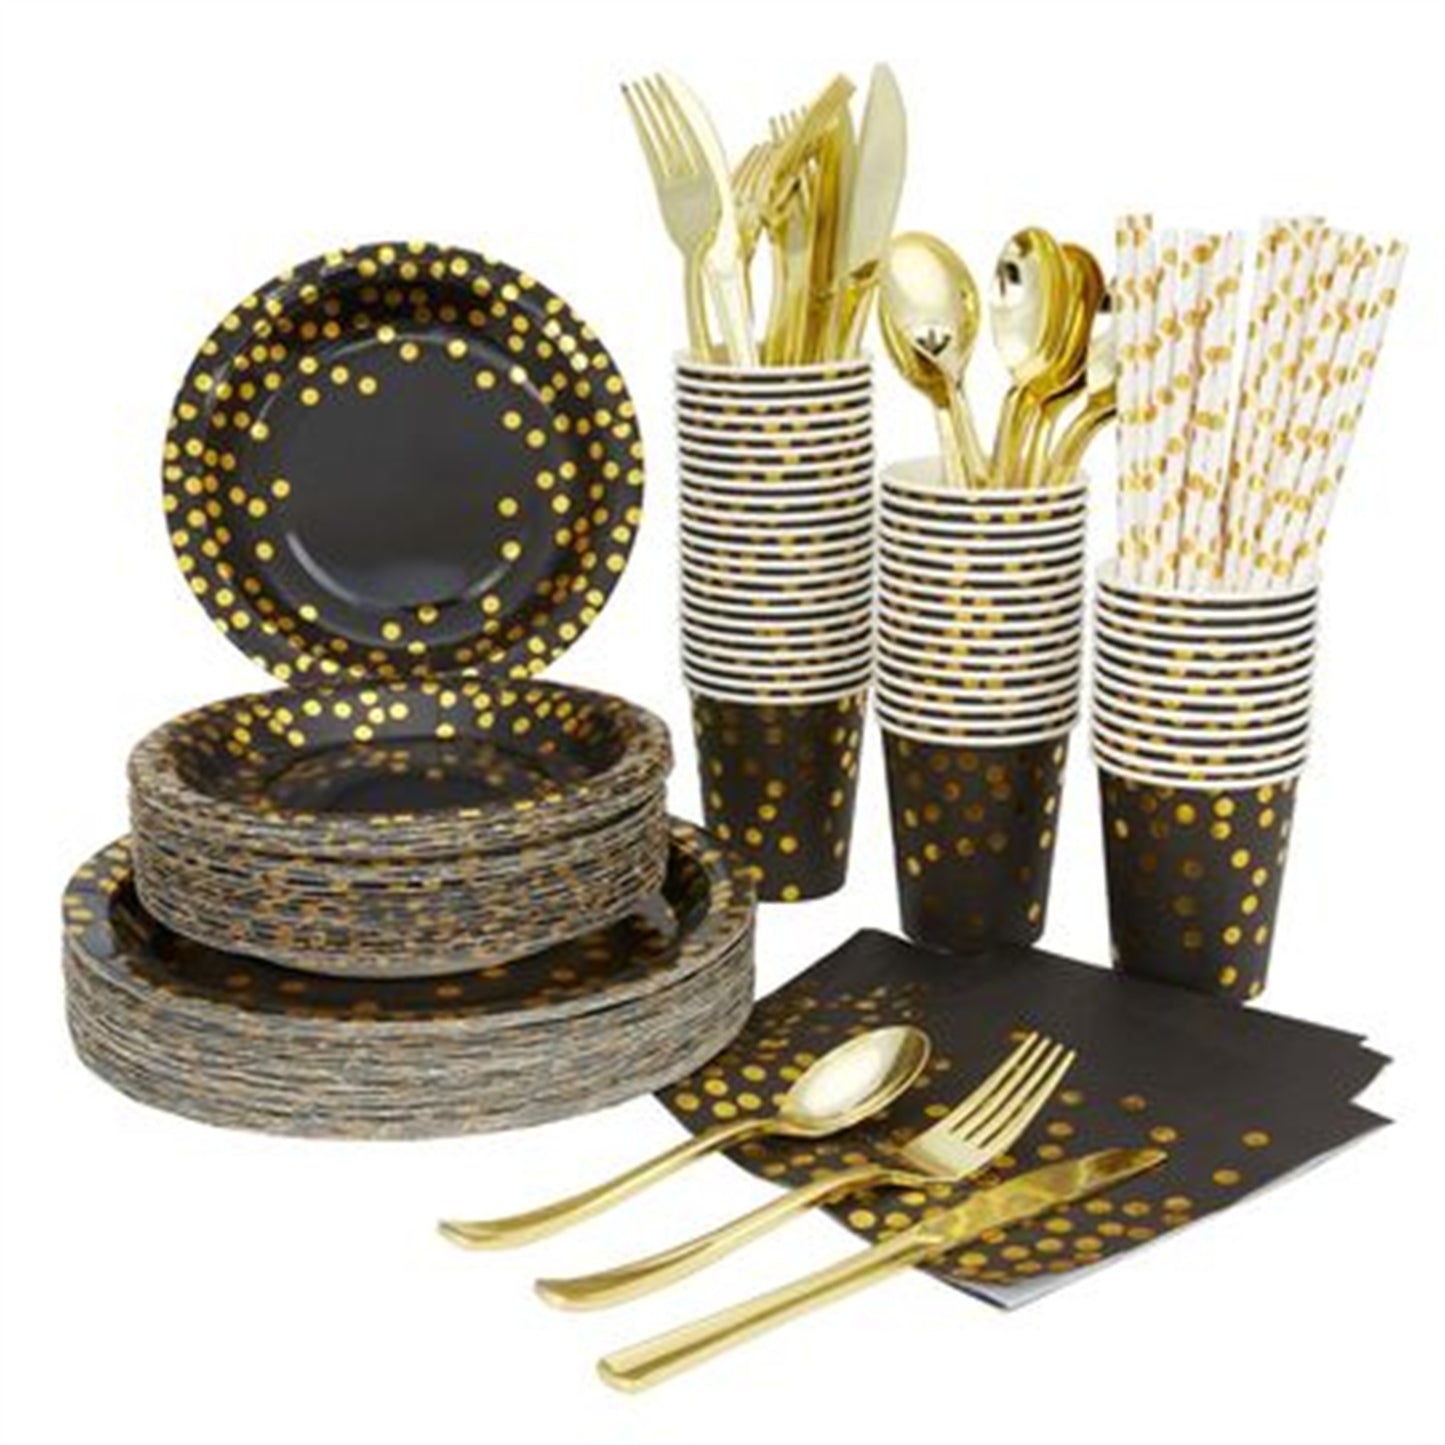 Gold Polka Dot Disposable Party Paper Plate Set